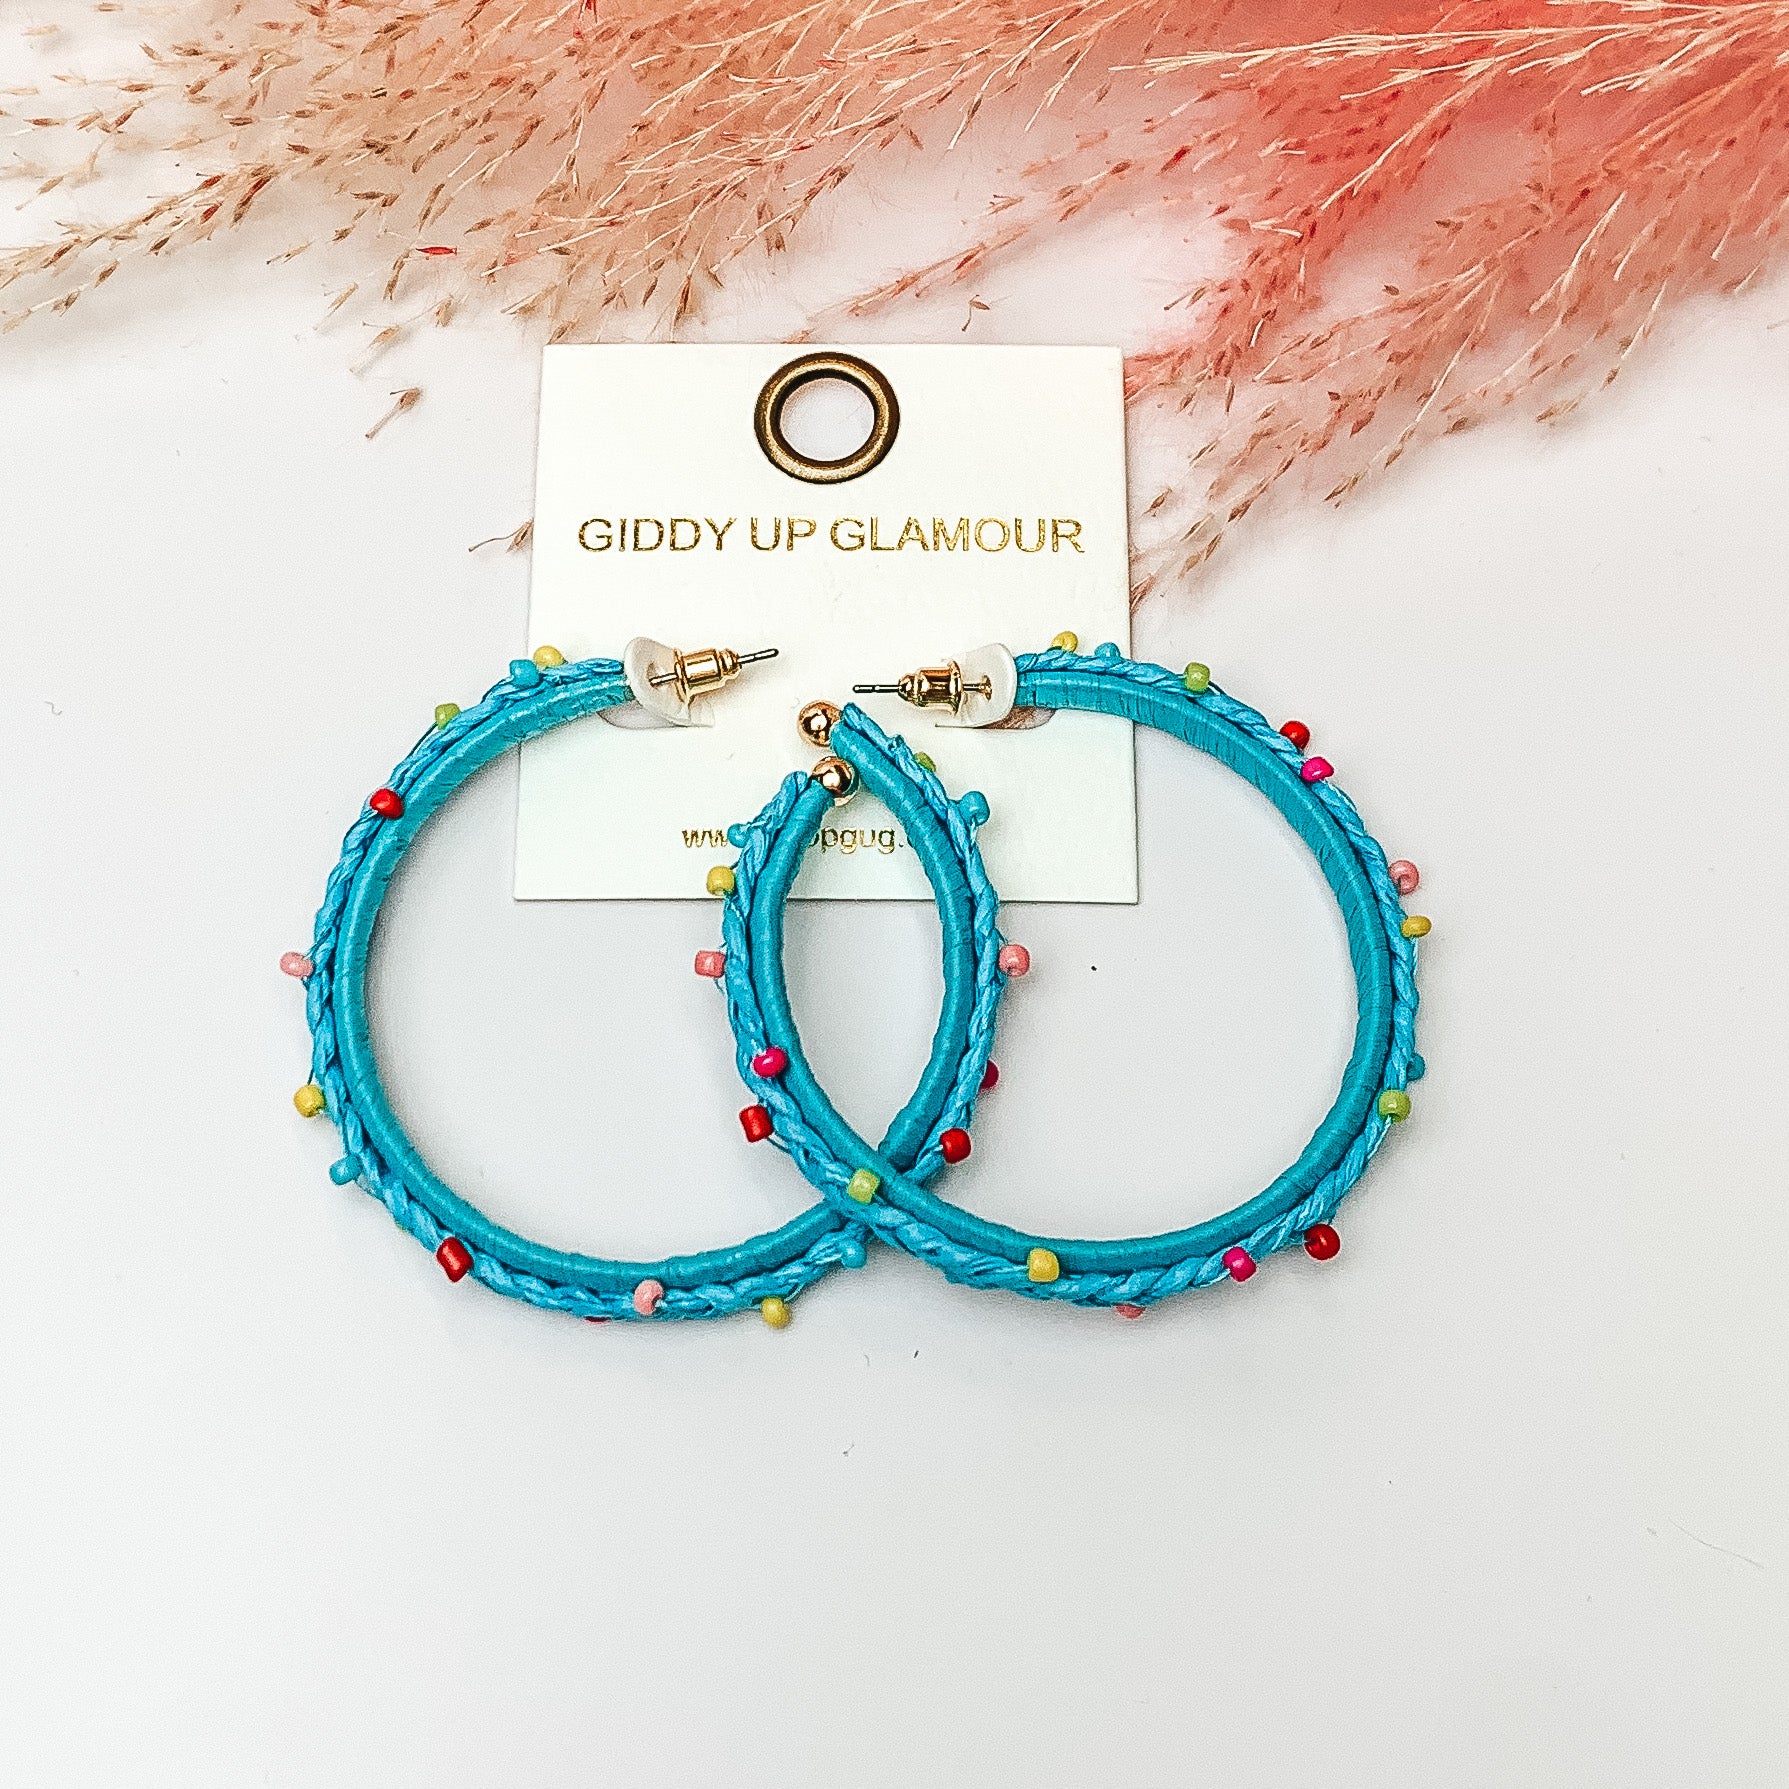 Pictured are raffia braided hoop earrings in aqua with colorful beads. They are pictured with a pink feather on a white background.